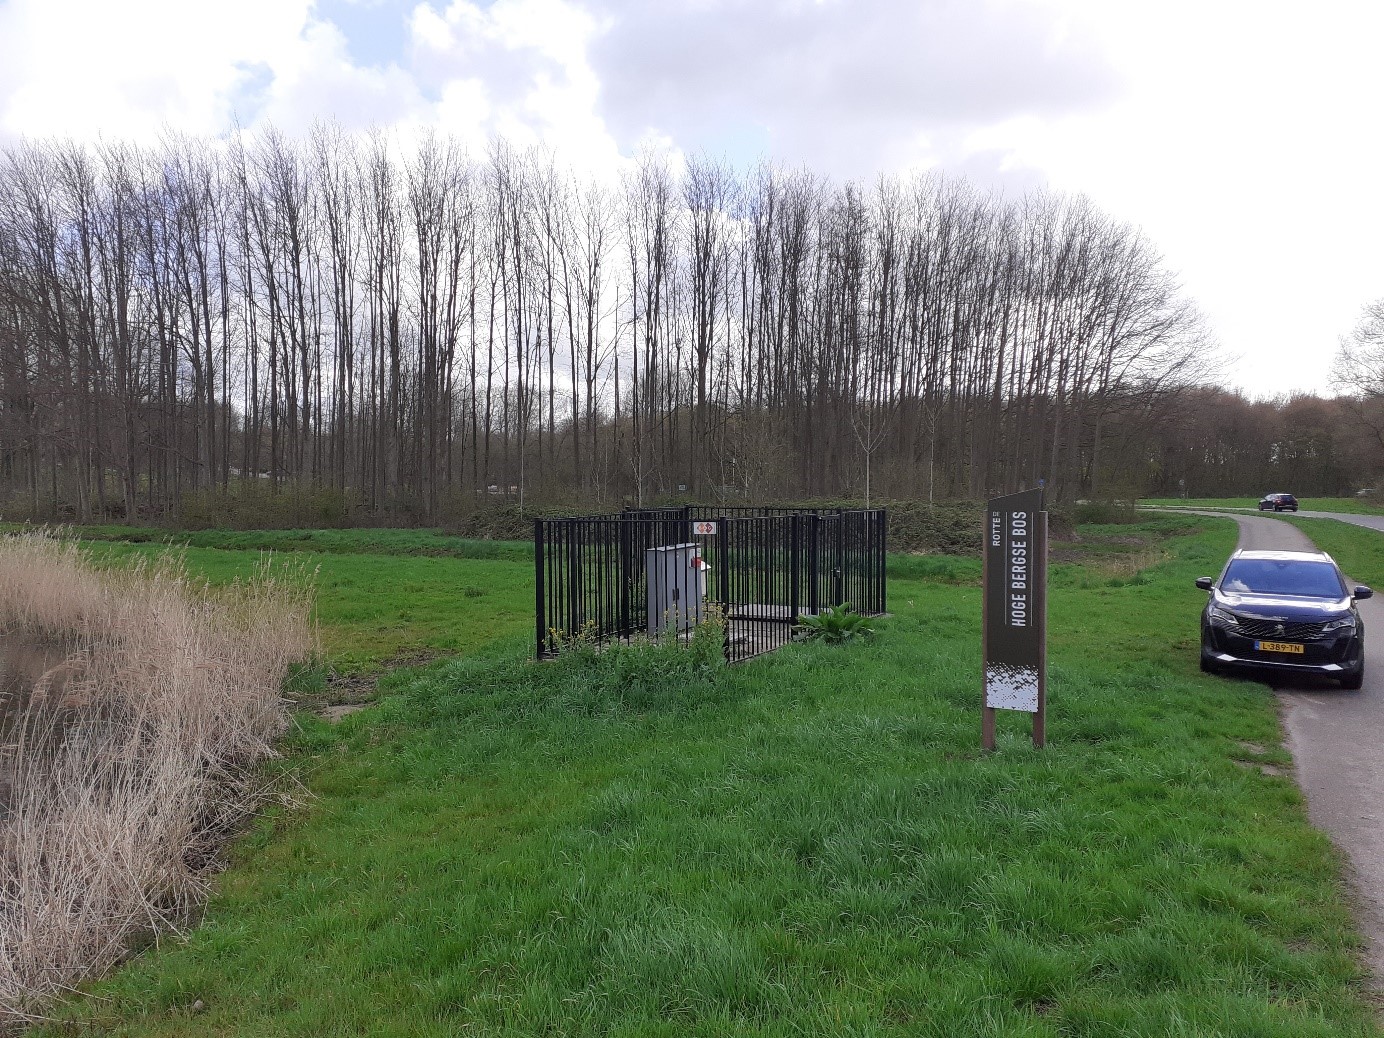 Project in beeld – Waders Milieu BV